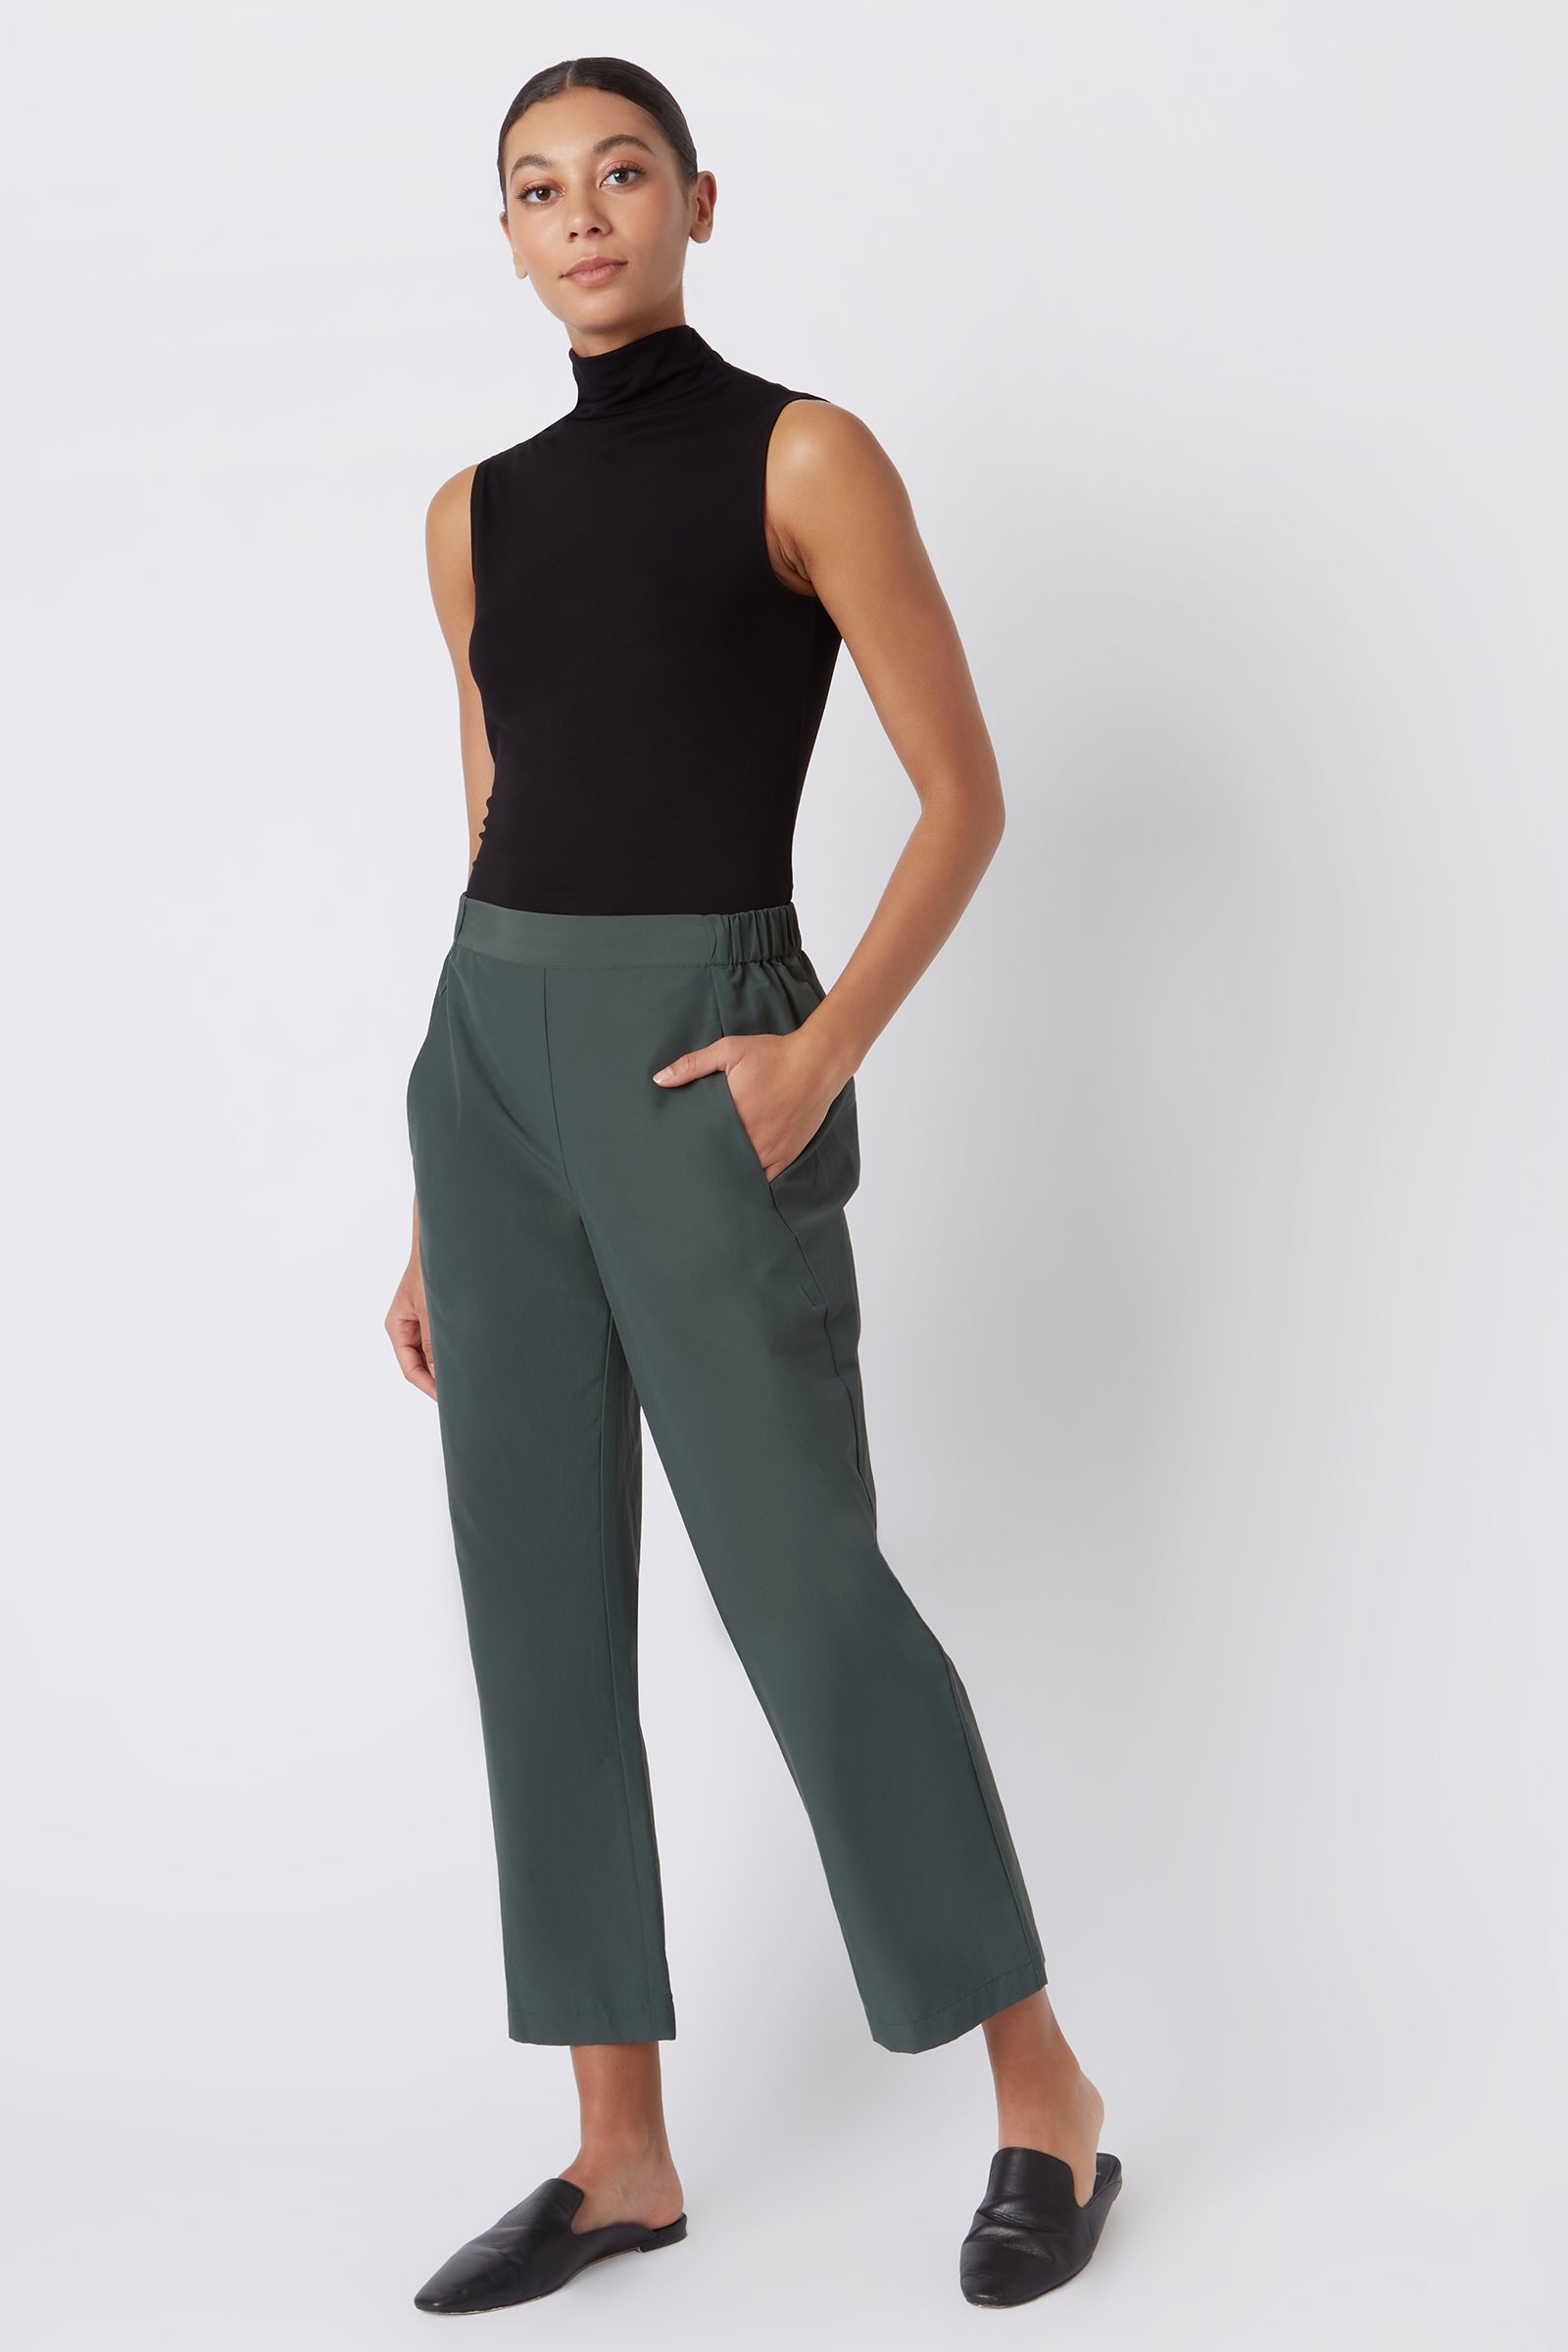 Kal Rieman Brit Crop Pant in Loden on Model with Hand in Pocket Full Front View